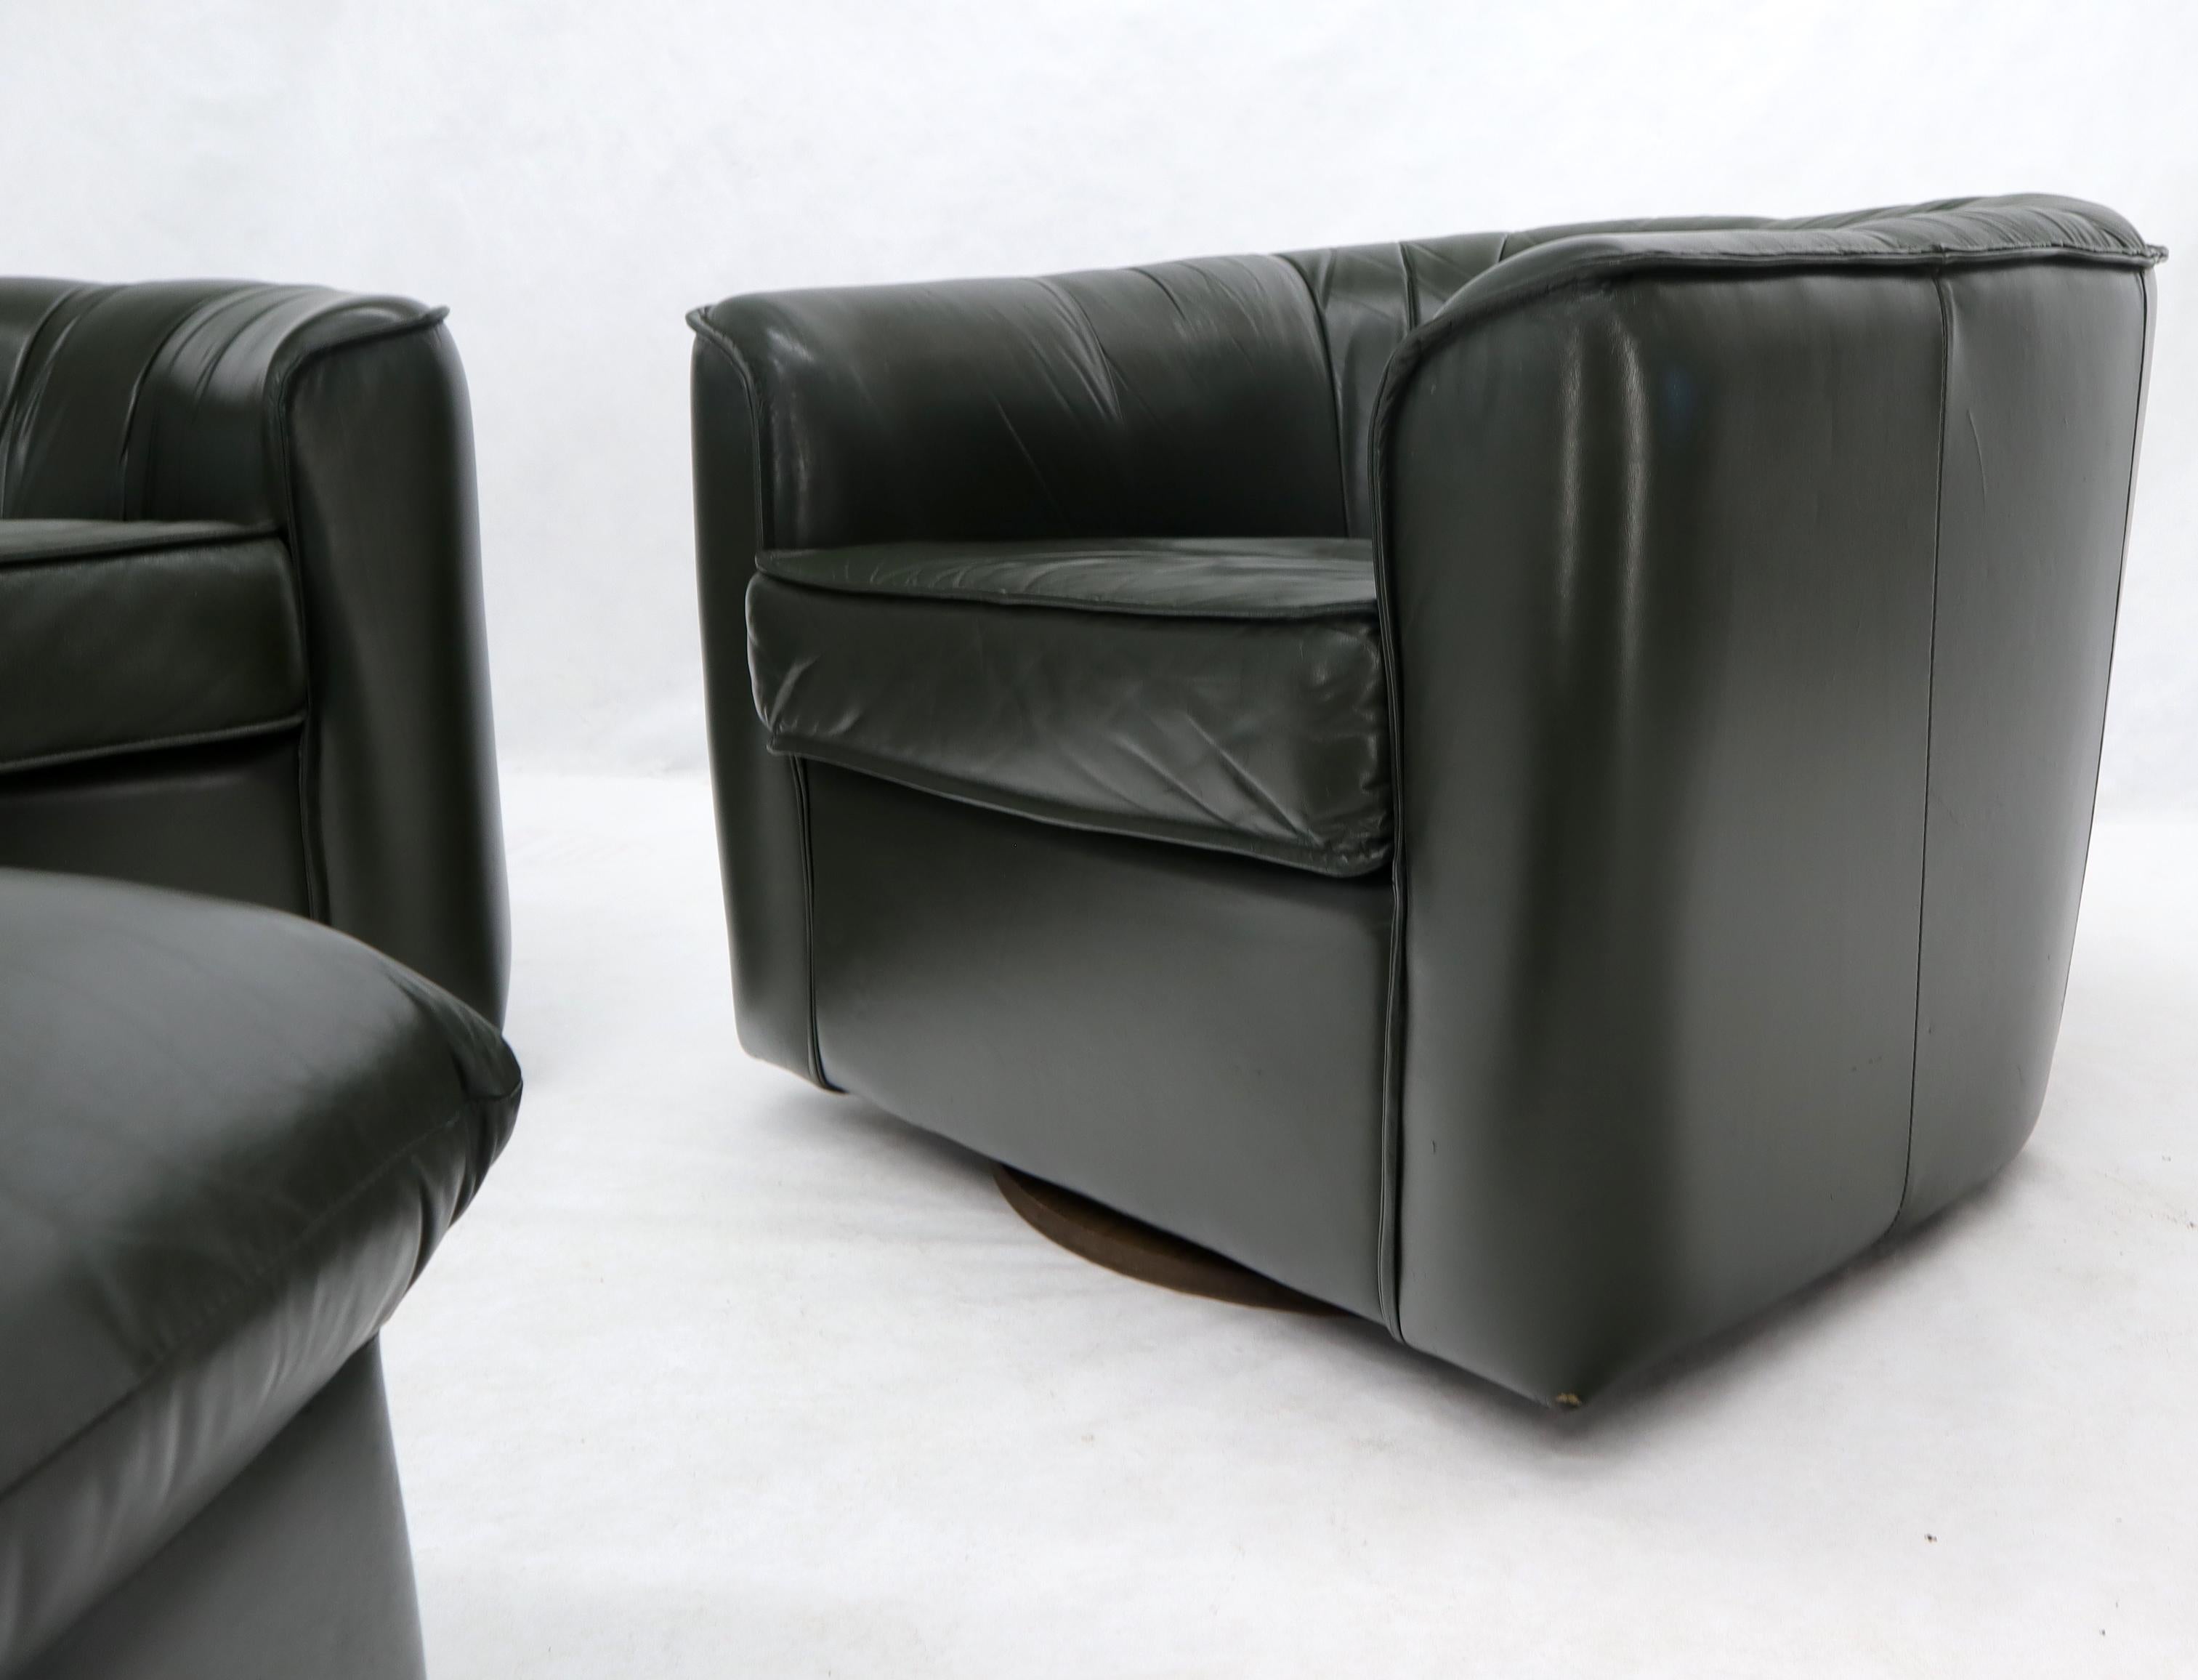 20th Century Pair of Swivel Dark Olive Green Leather Upholstery Lounge Chairs with Ottoman